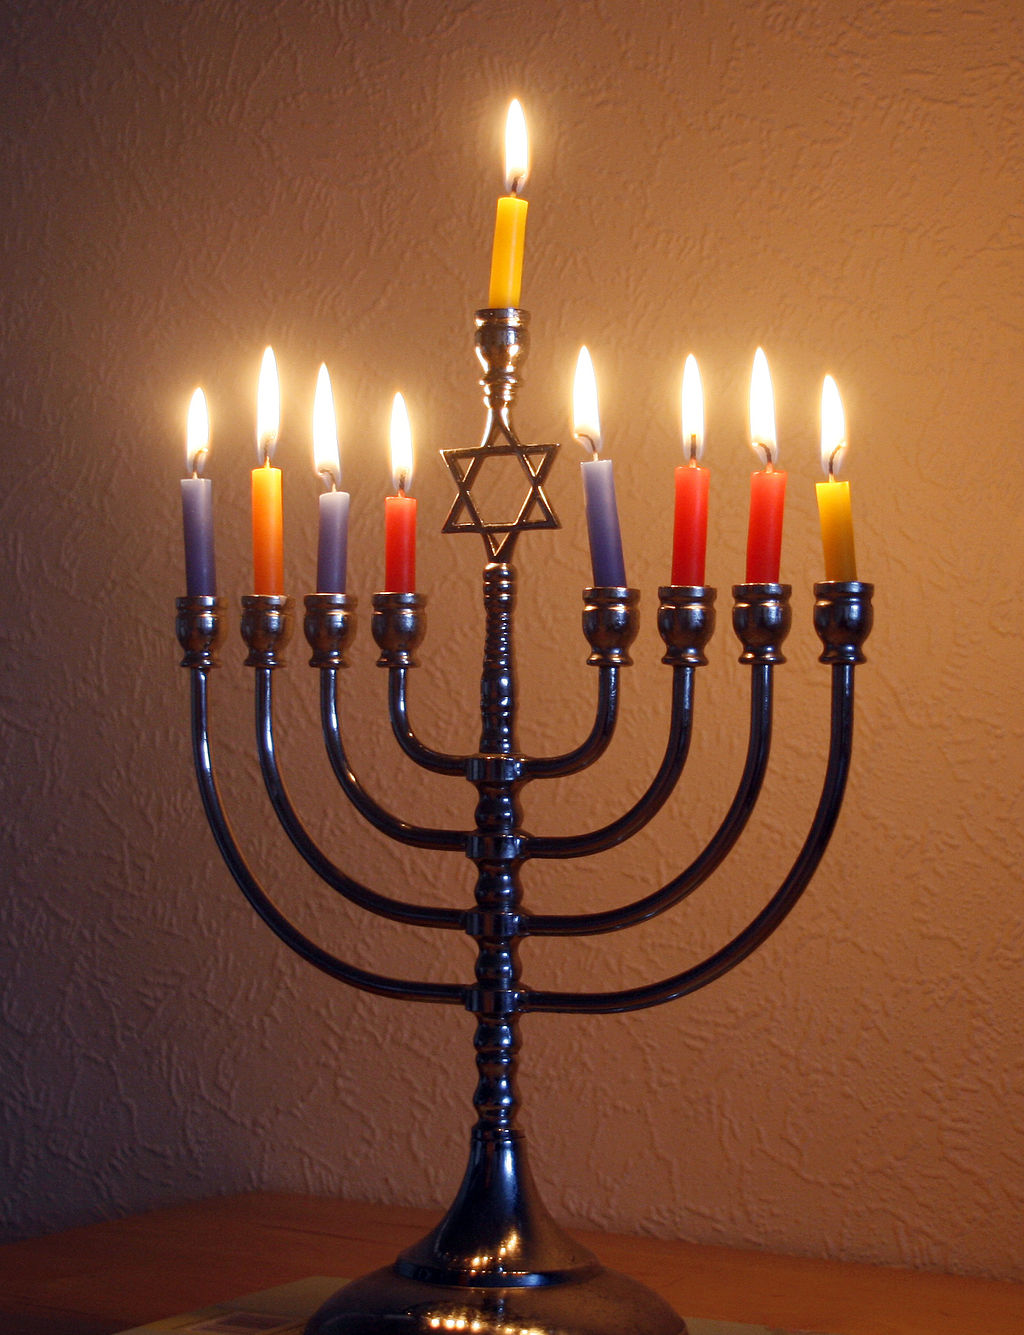 Menorah, a candle holder with nine Branches.